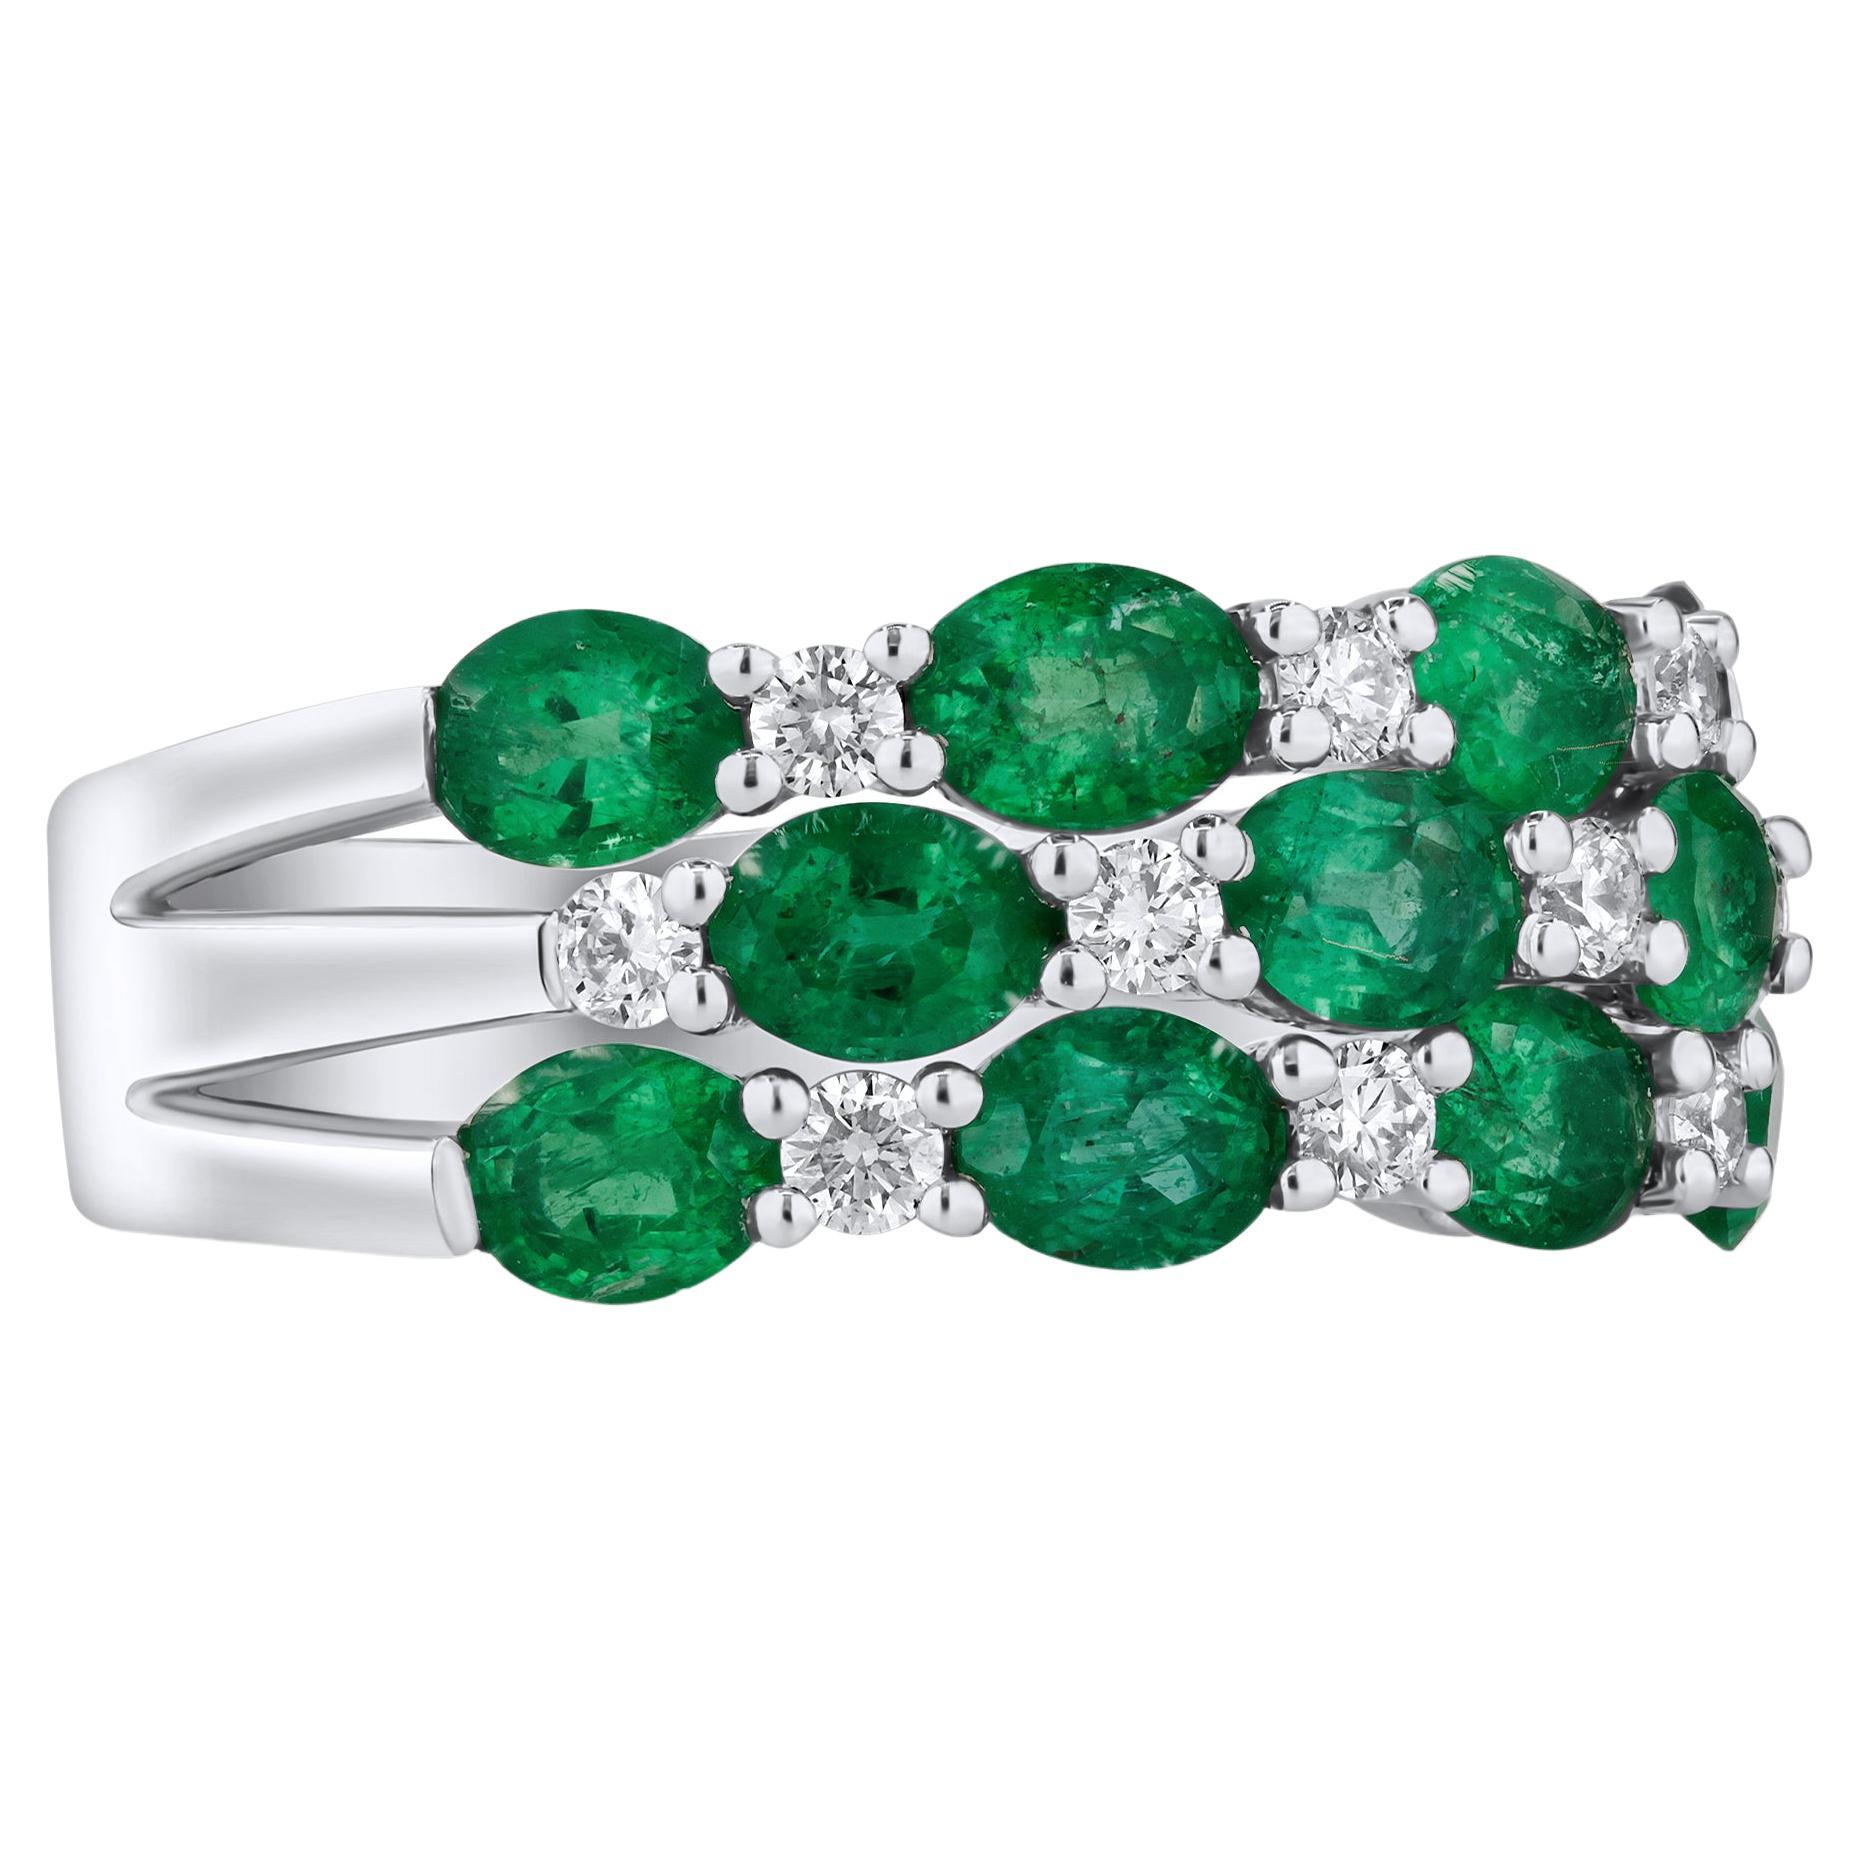 2.20 Carat Oval Emerald and 0.29 Carat Diamond Checkerboard Ring in 14W ref1656 For Sale